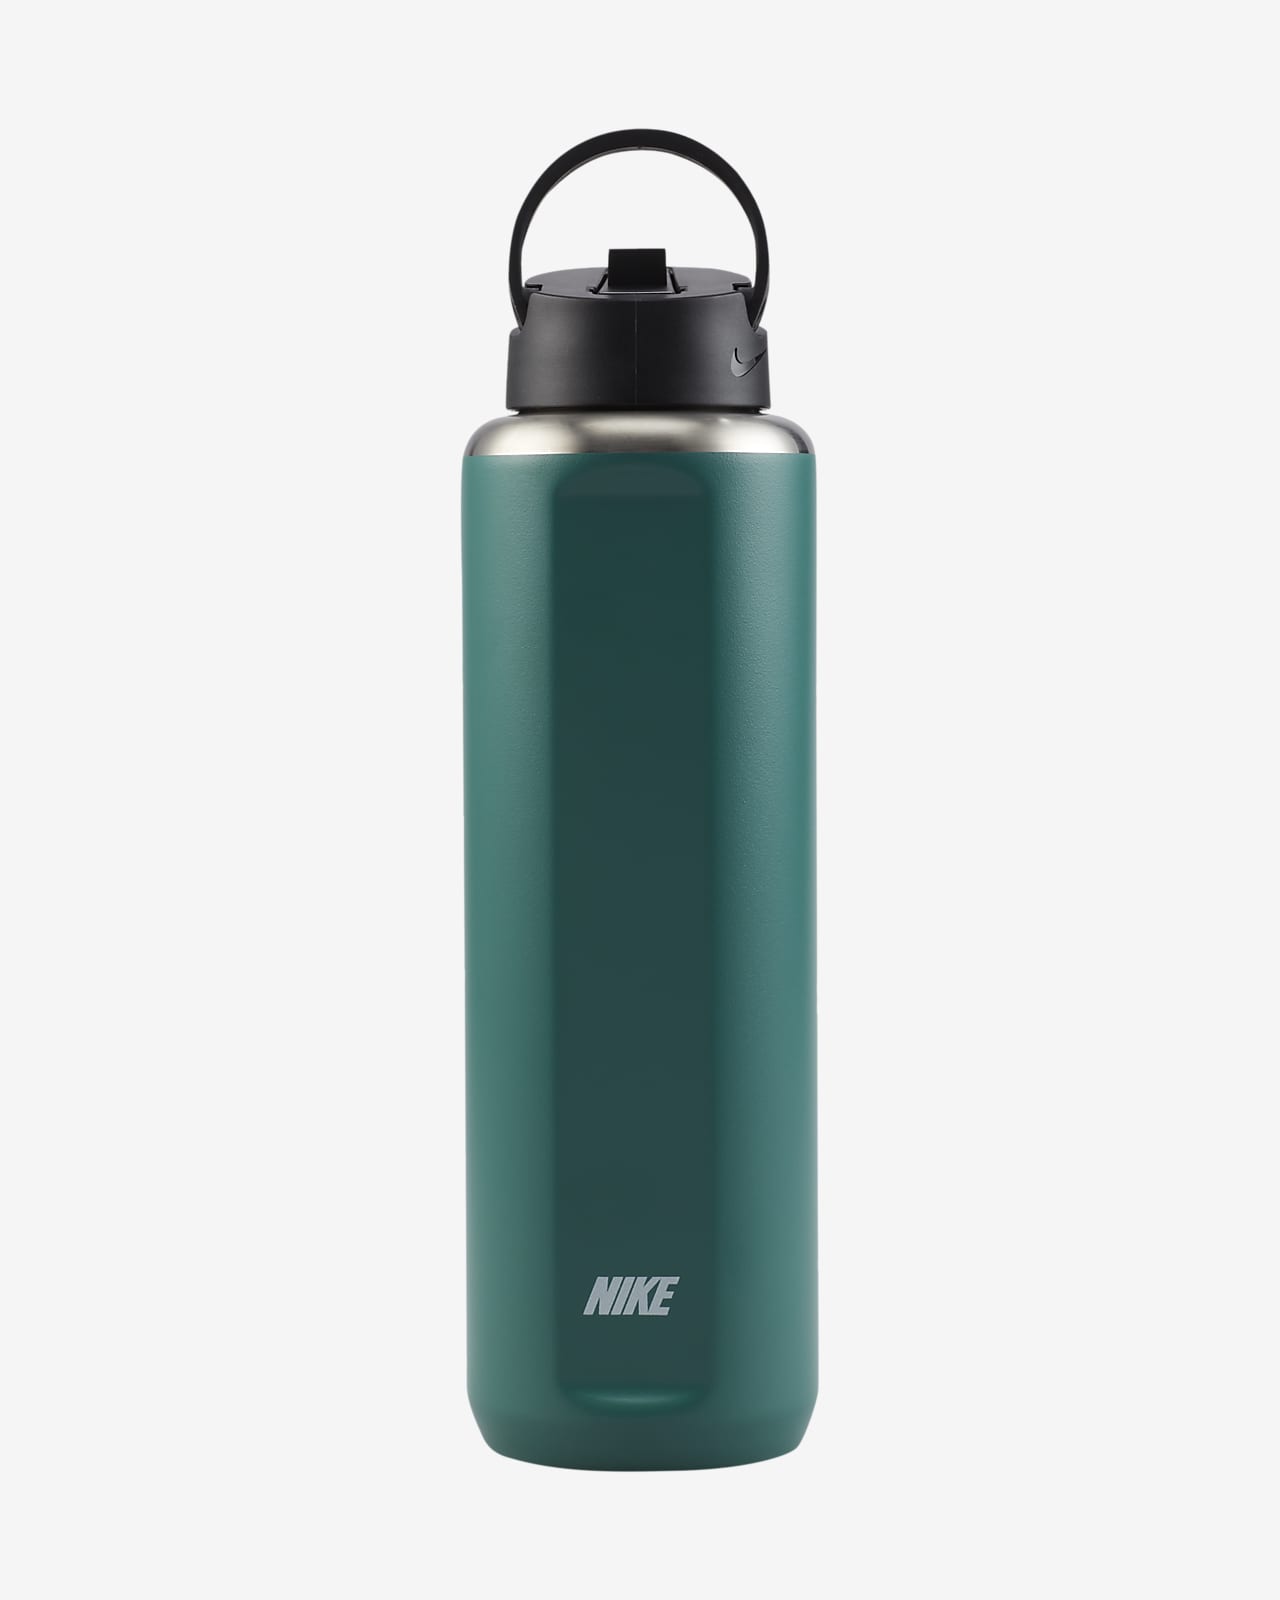 https://static.nike.com/a/images/t_PDP_1280_v1/f_auto,q_auto:eco/f130ebd3-e51f-439a-b32b-206b47771261/recharge-stainless-steel-straw-bottle-32-oz-JwFkqk.png